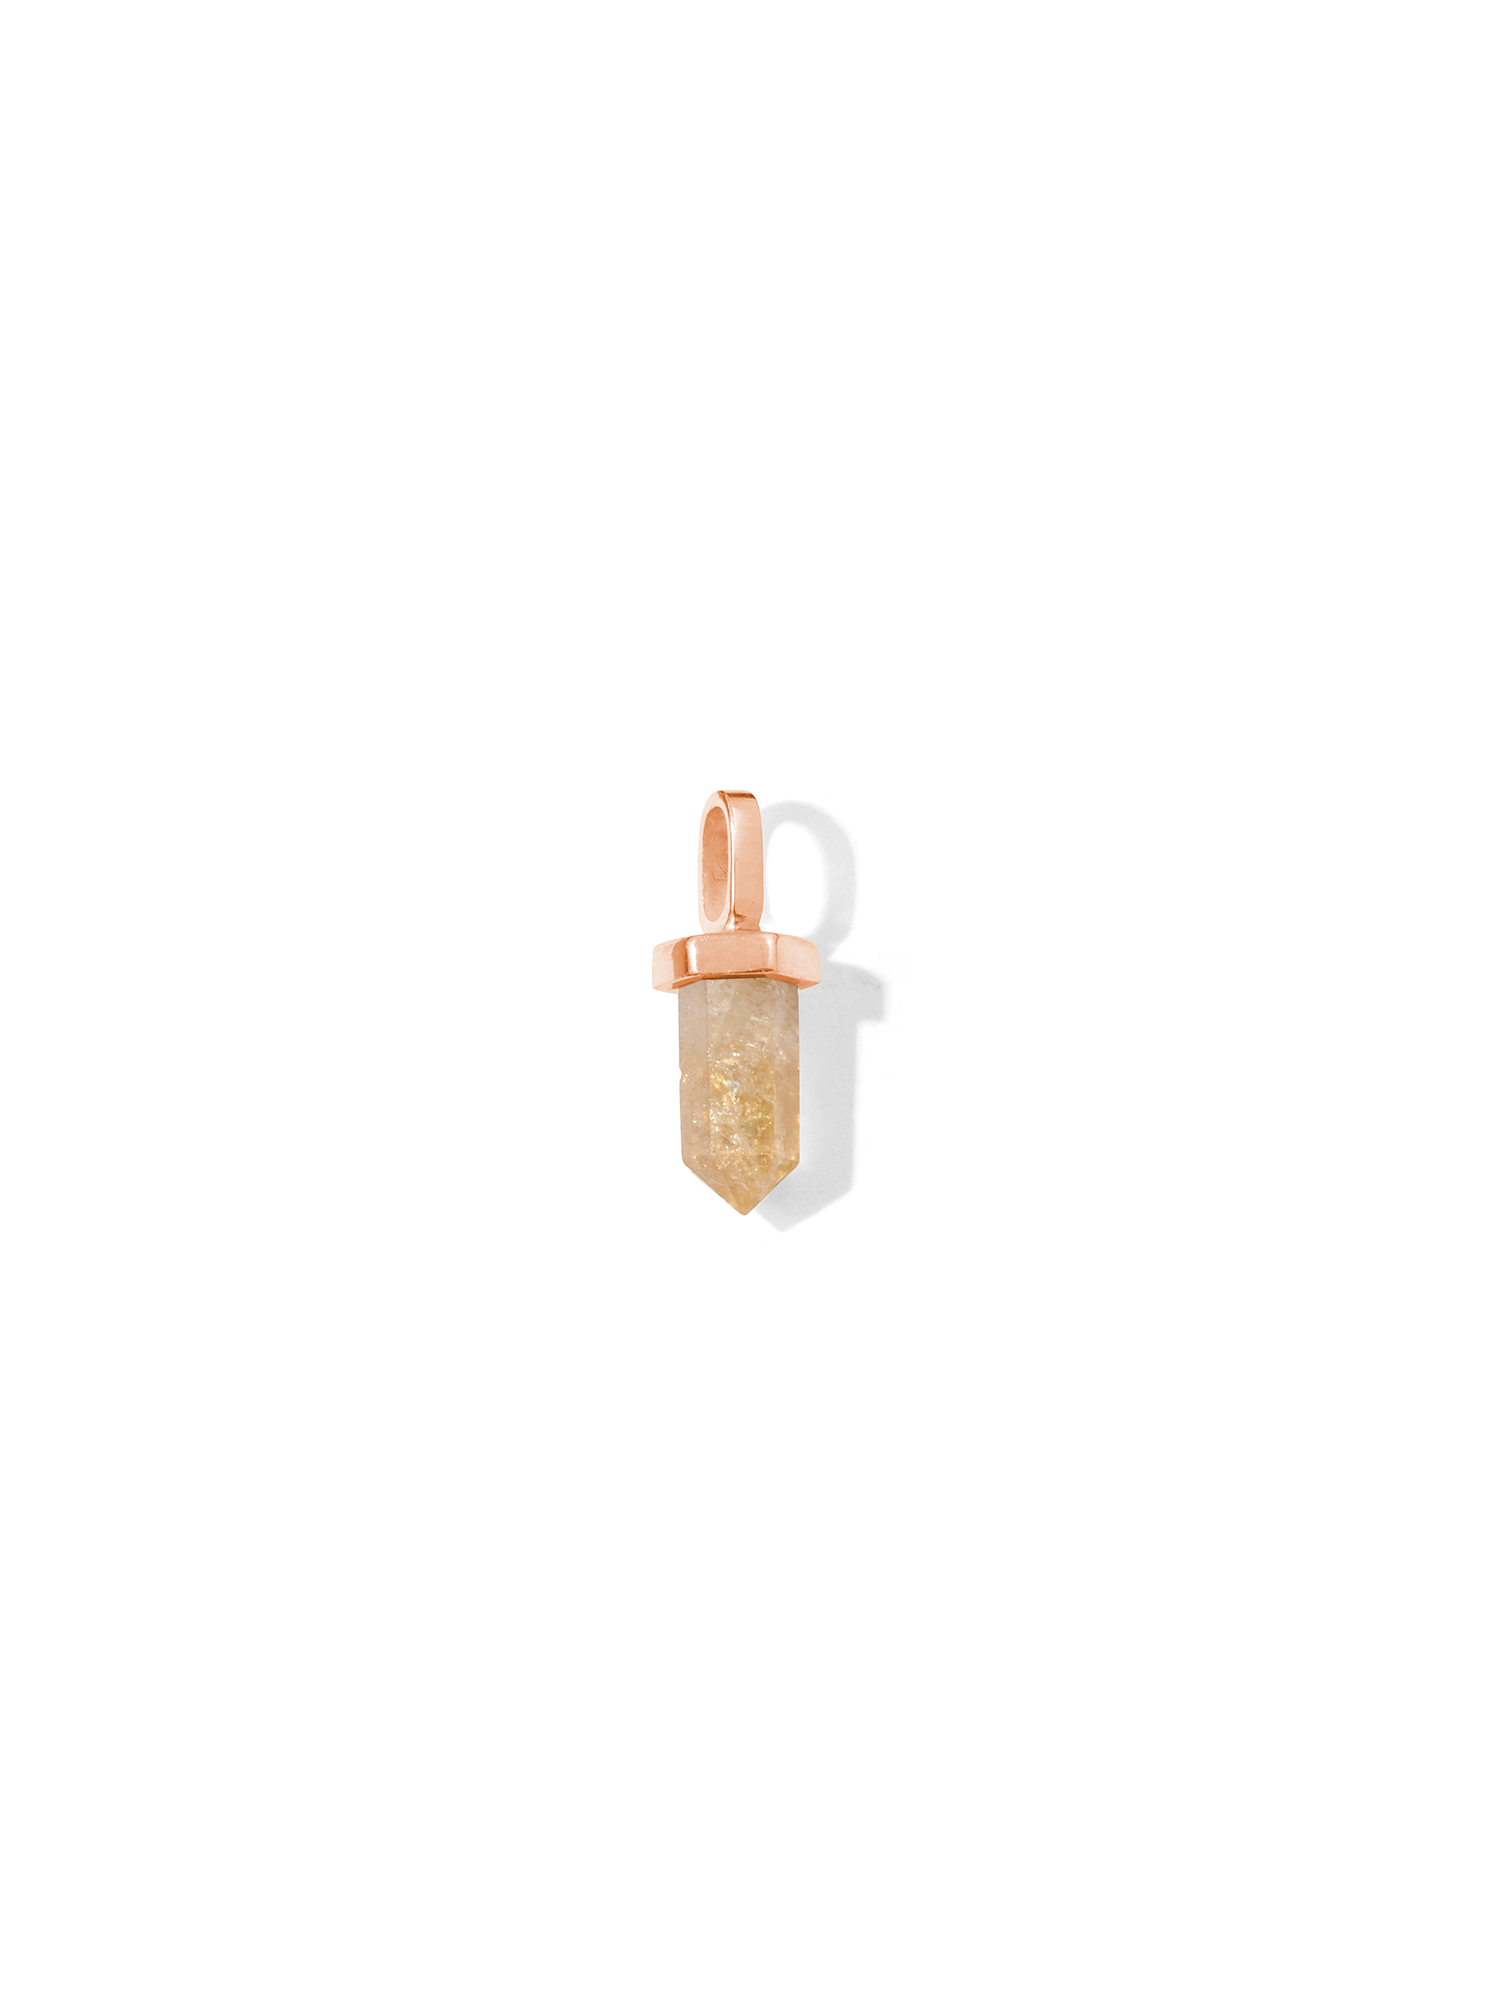 terminated crystal necklace charm | citrine